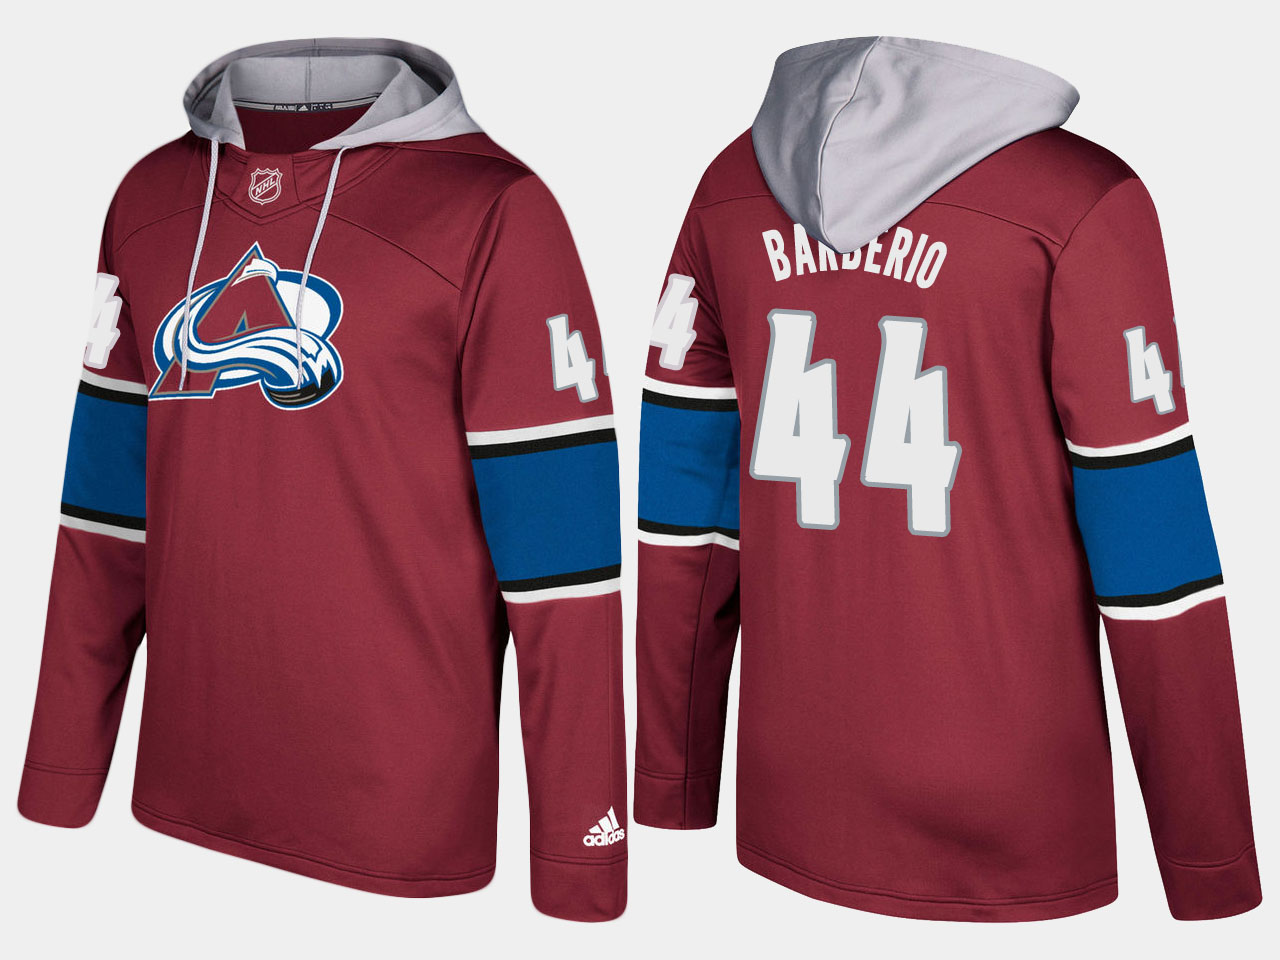 Nike Avalanche 44 Mark Barberio Name And Number Burgundy Hoodie